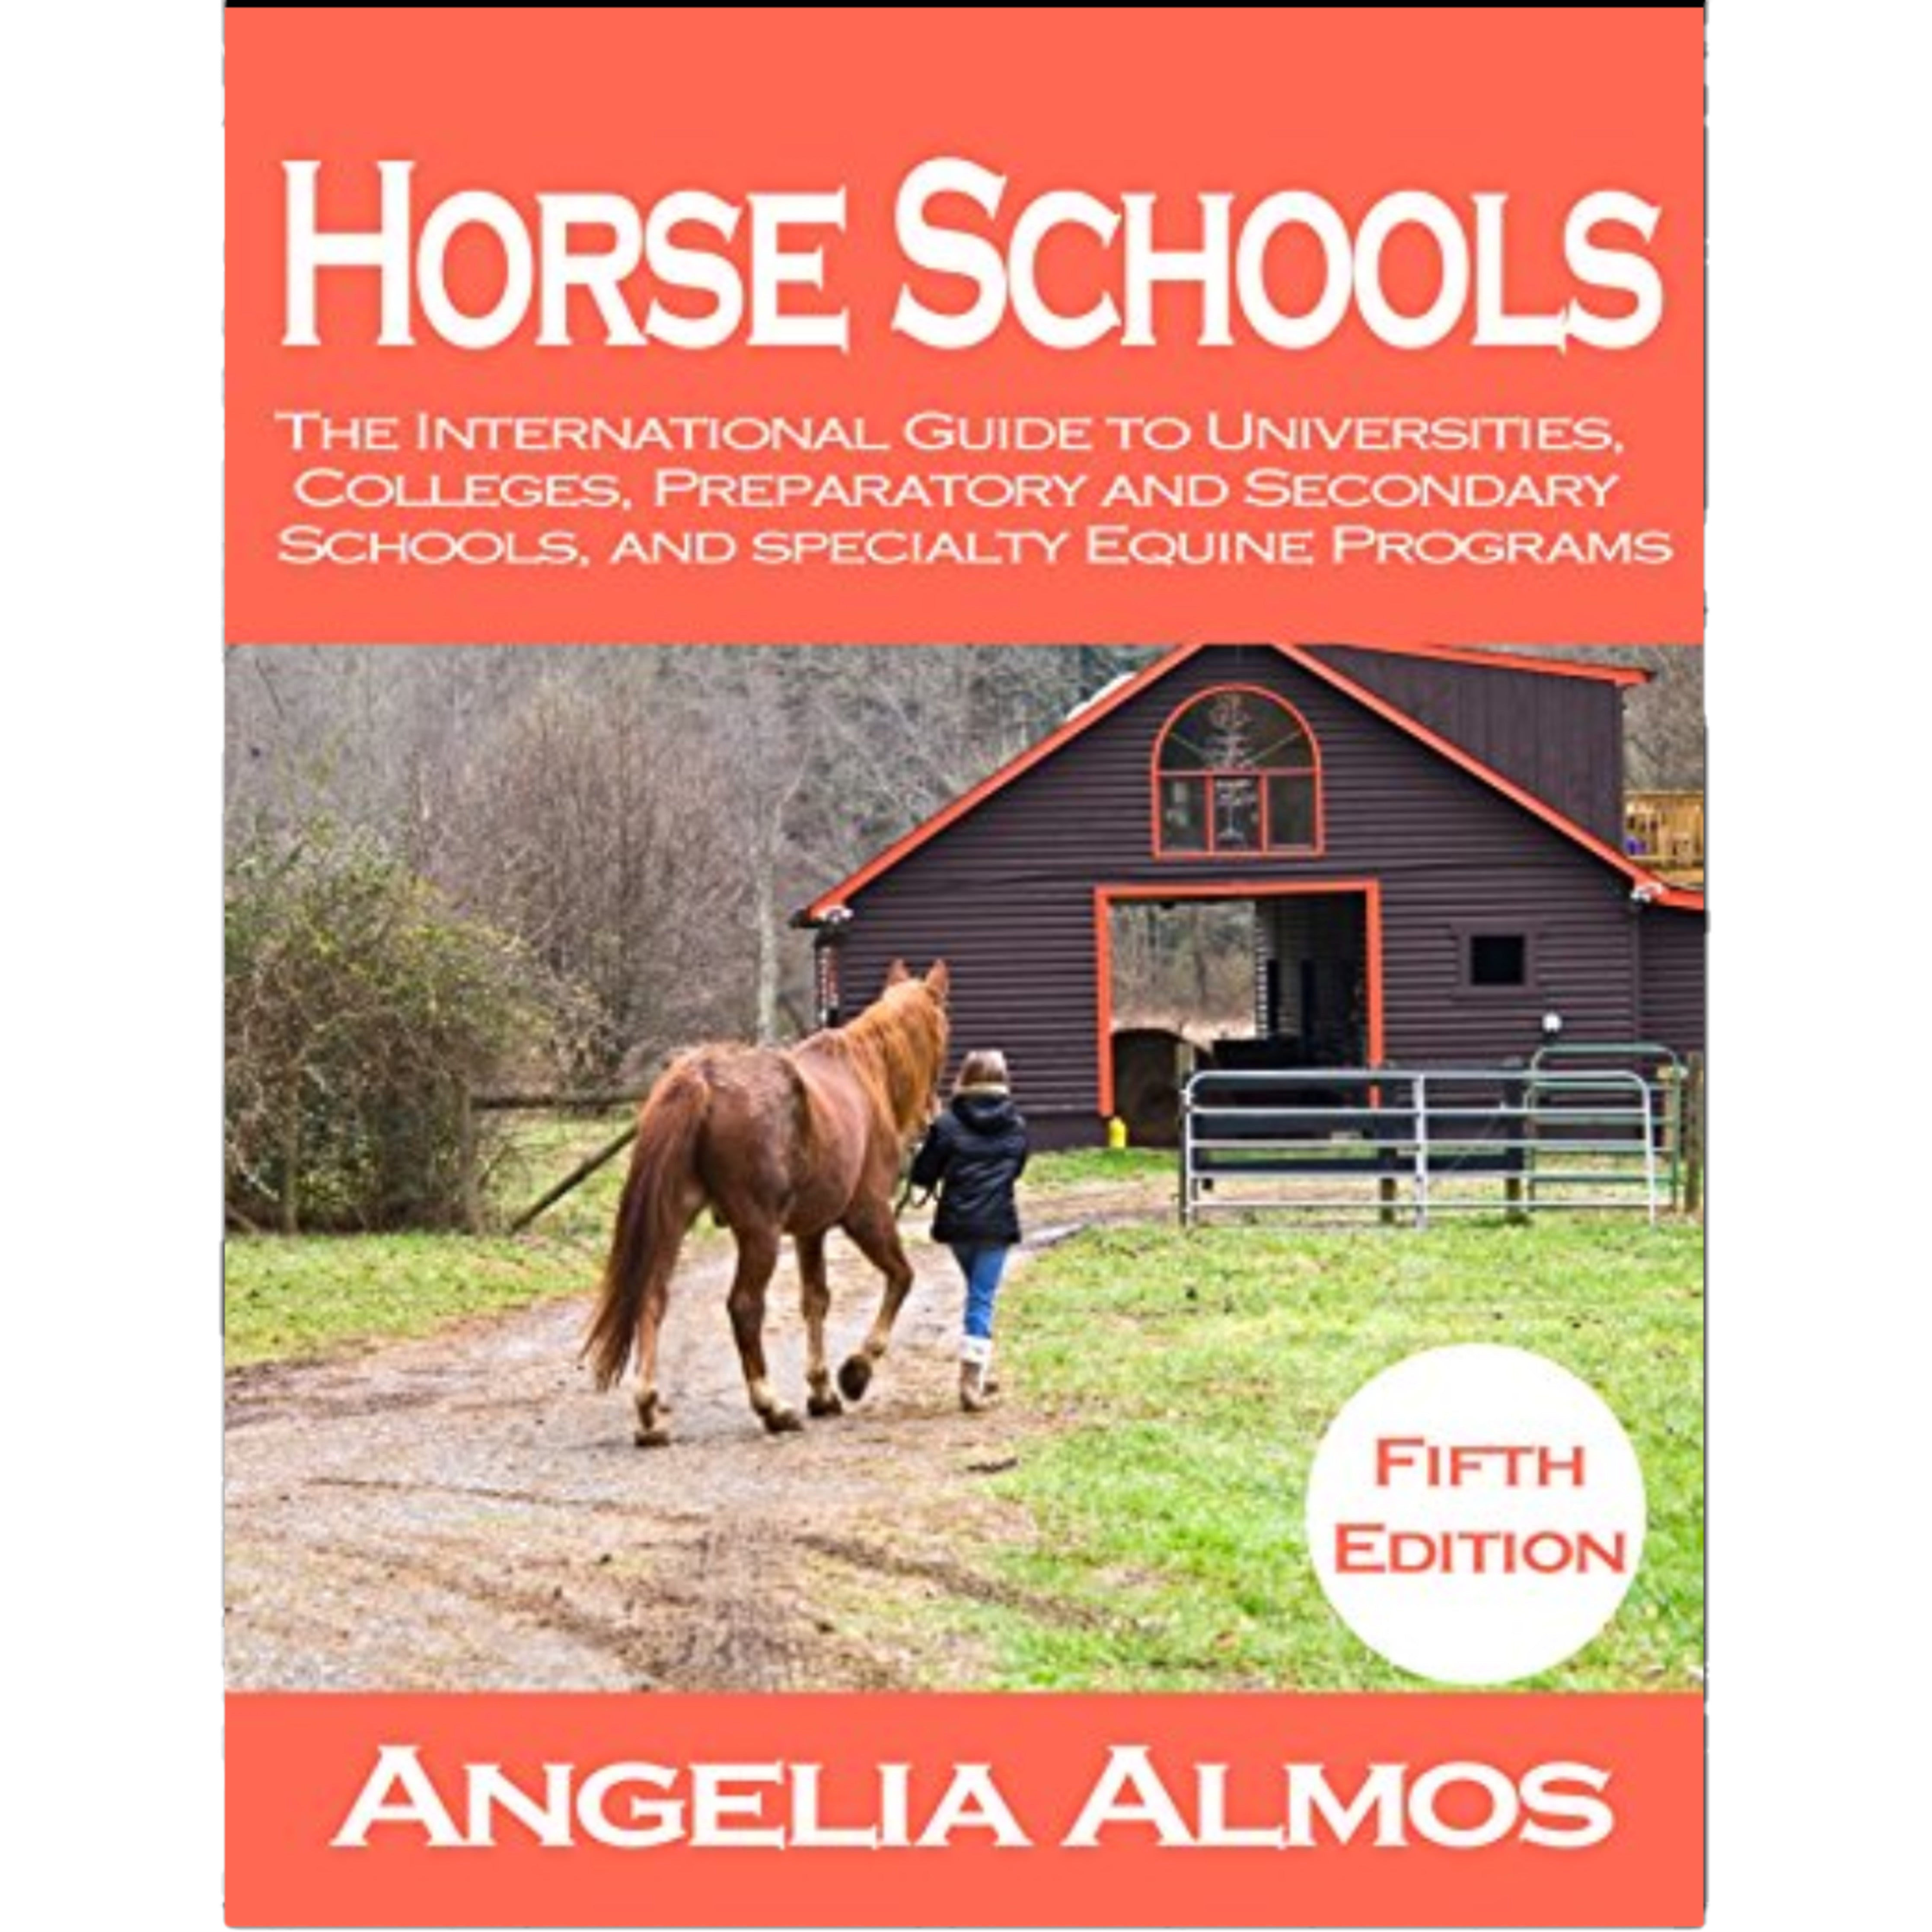 Horse Schools: The International Guide